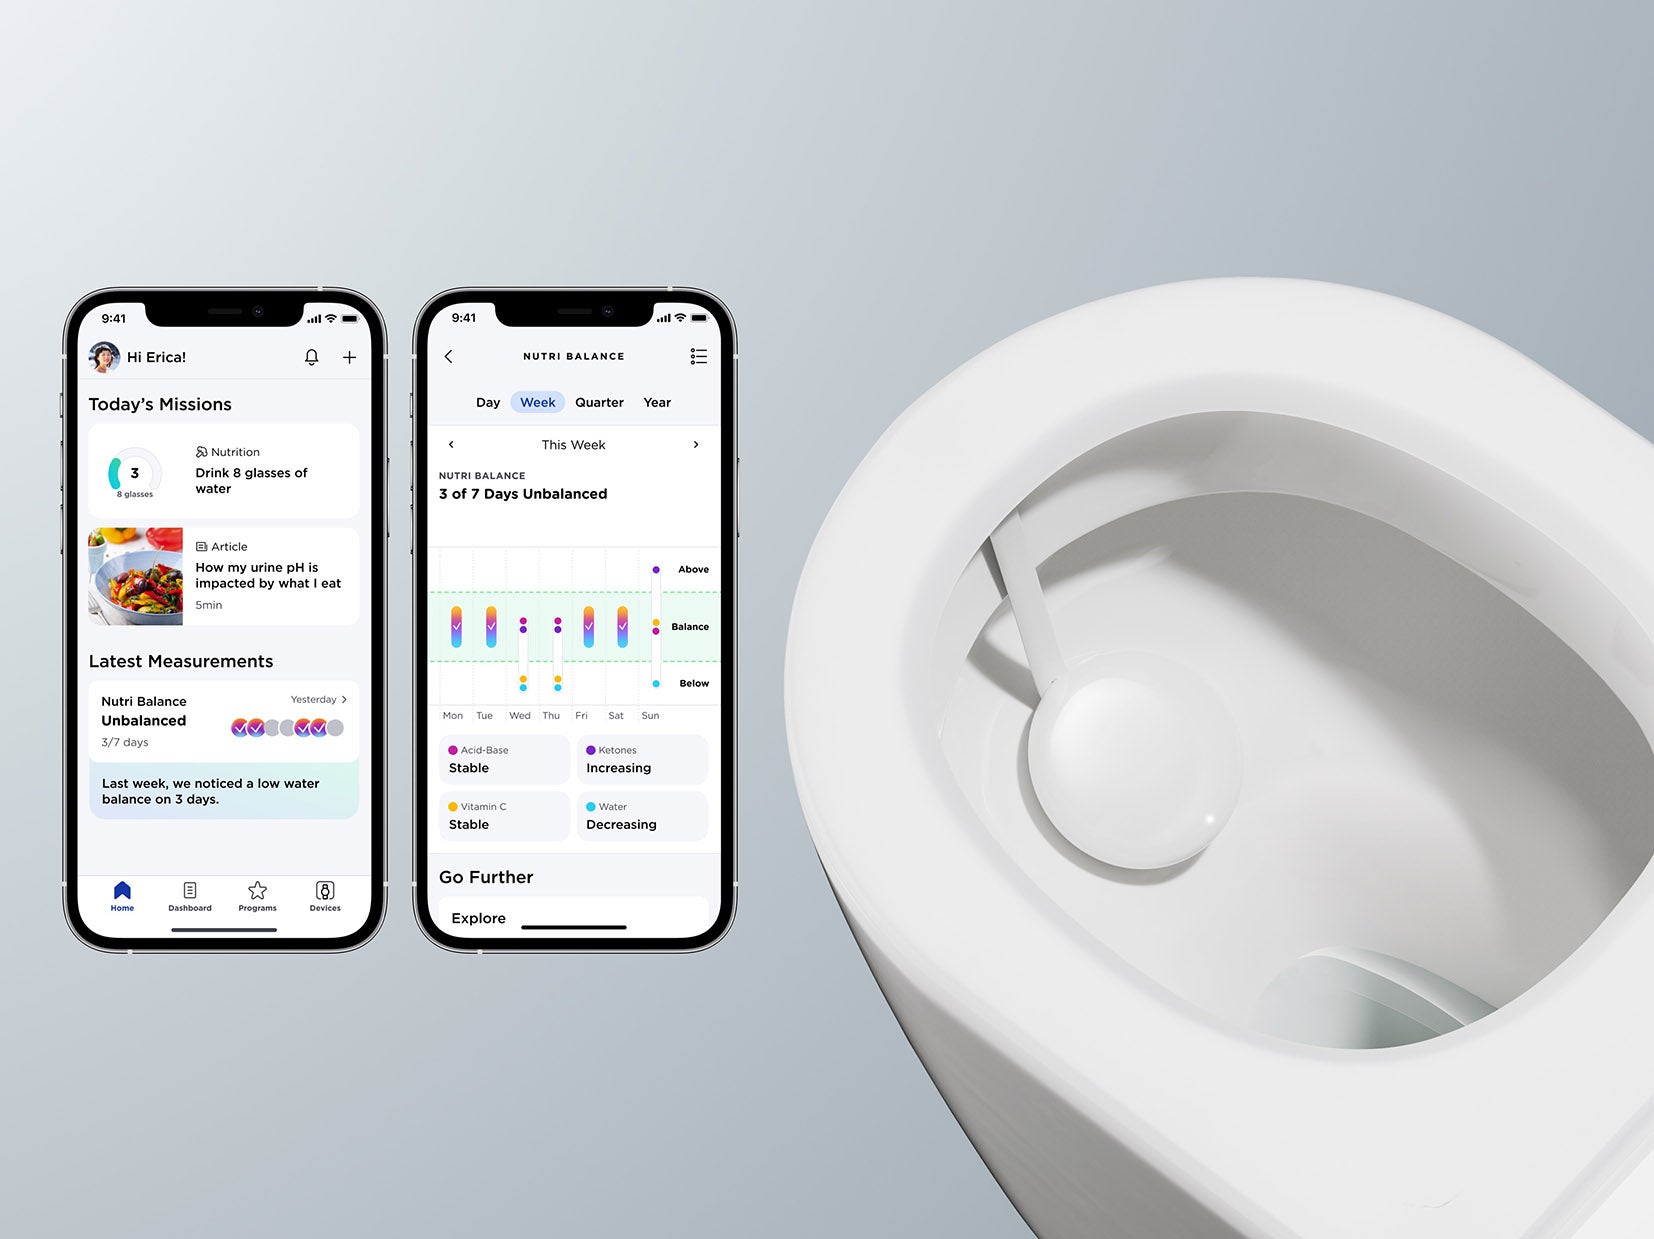 Withings announces 'breakthrough' in-home smart urine lab for